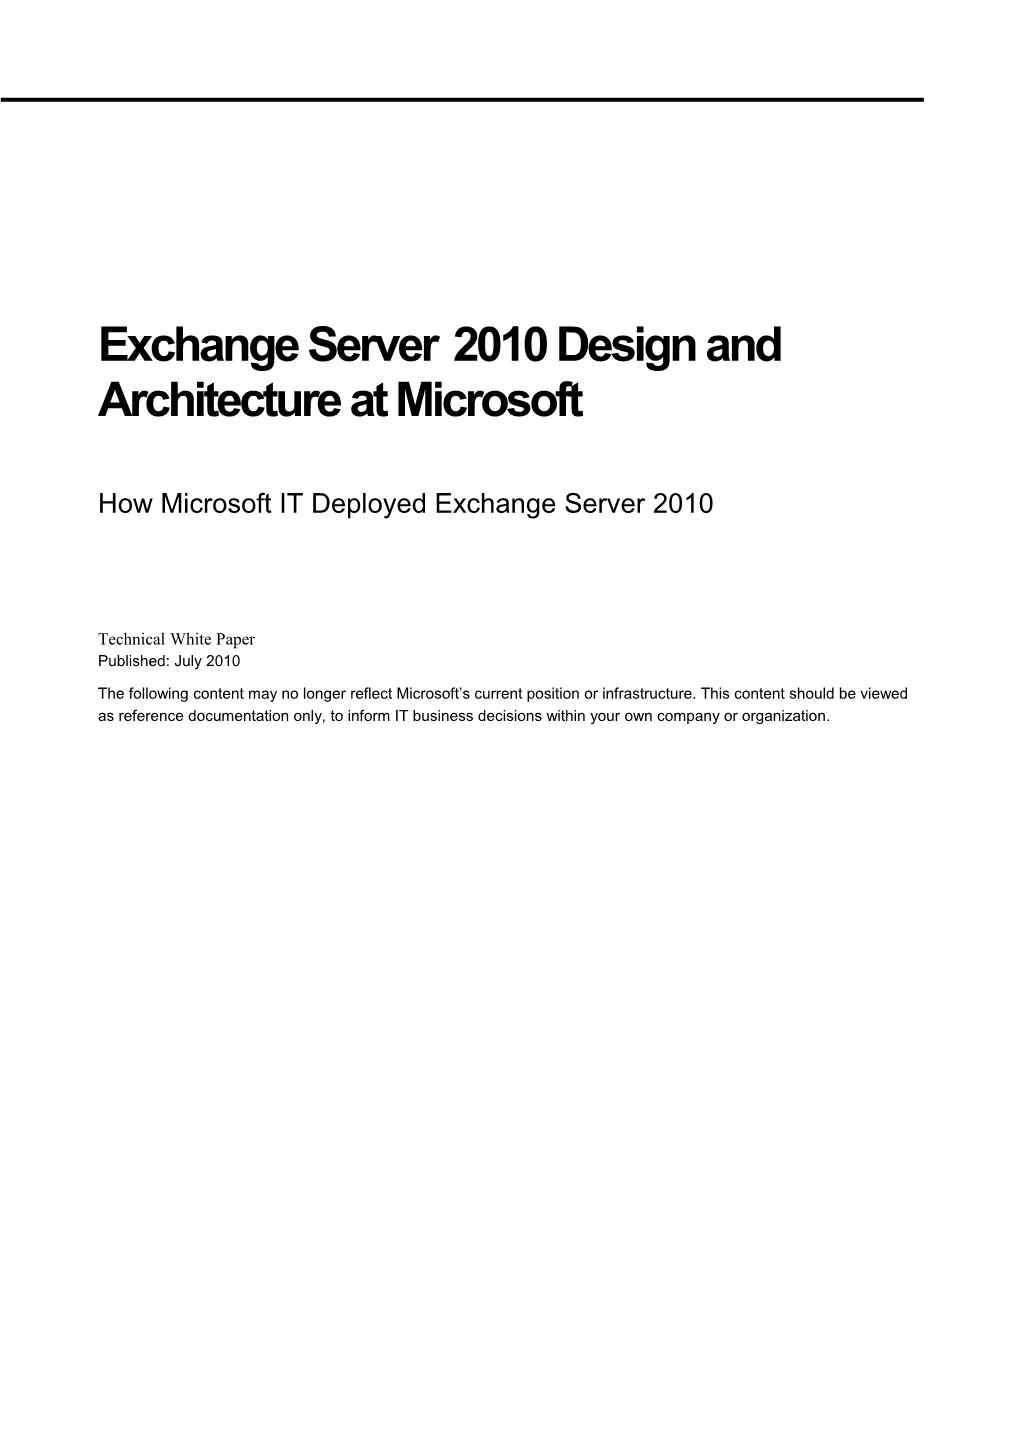 IT Showcase: Exchange Server 2010 Design and Architecture at Microsoft Technical White Paper